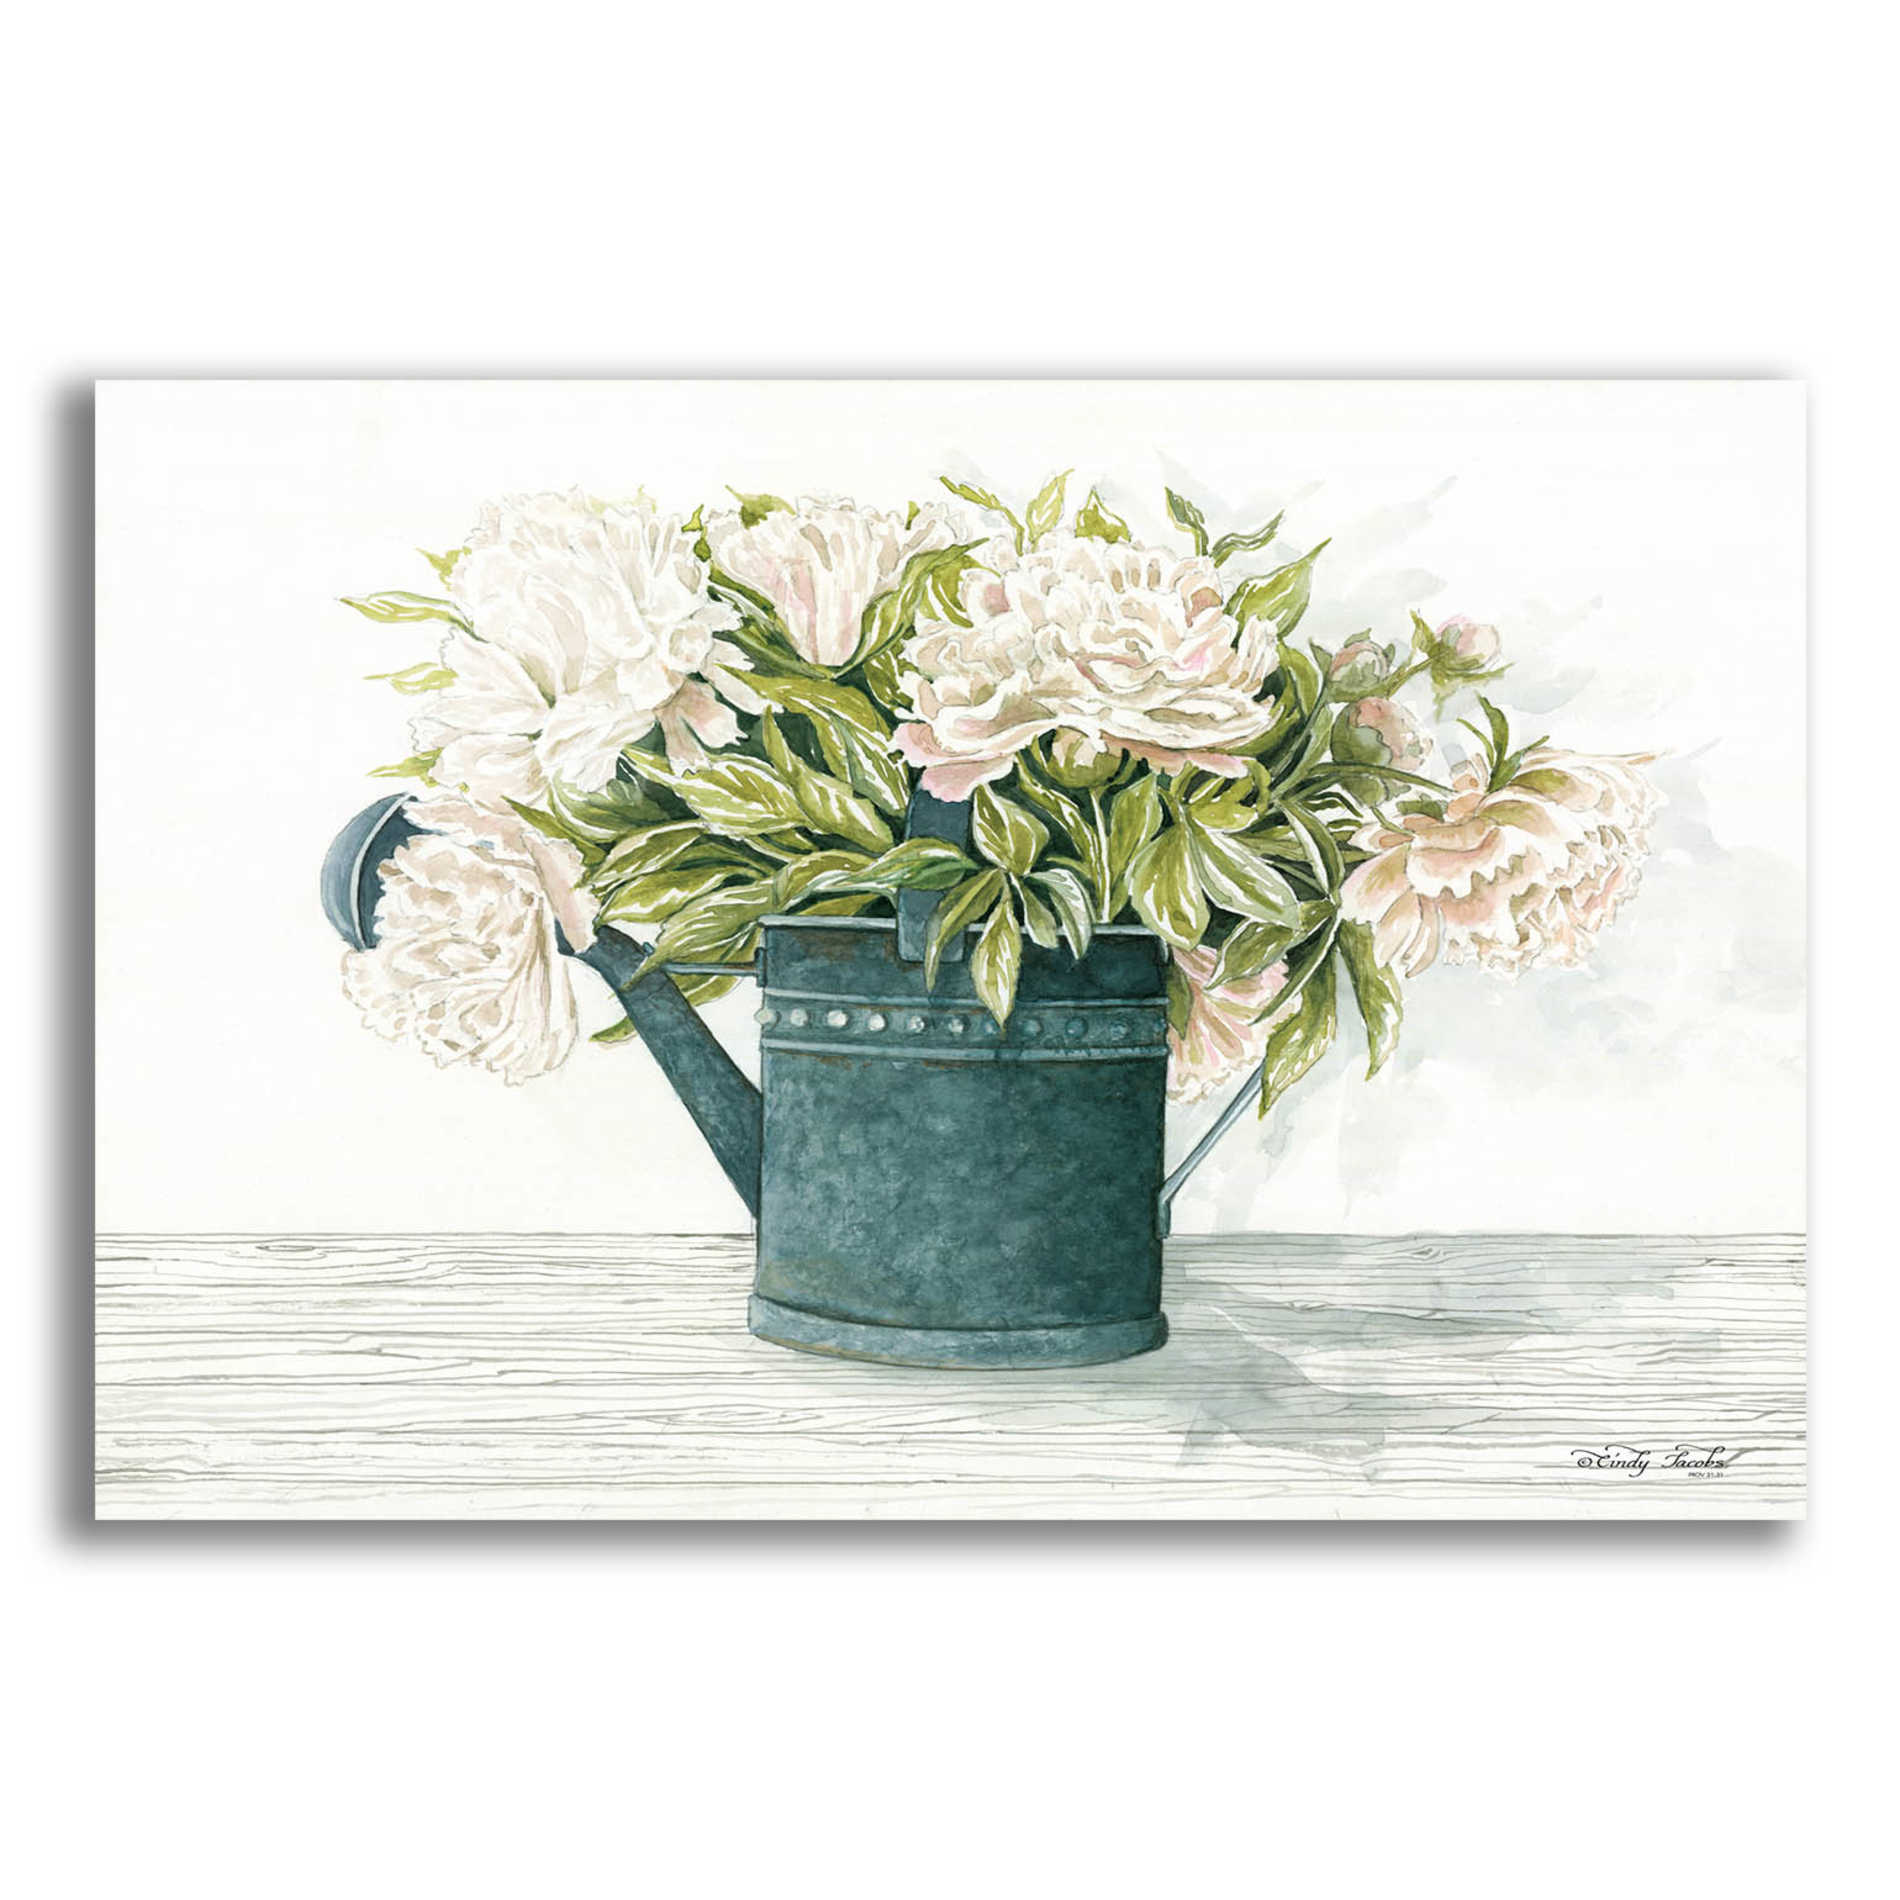 Epic Art 'Galvanized Watering Can Peonies' by Cindy Jacobs, Acrylic Glass Wall Art